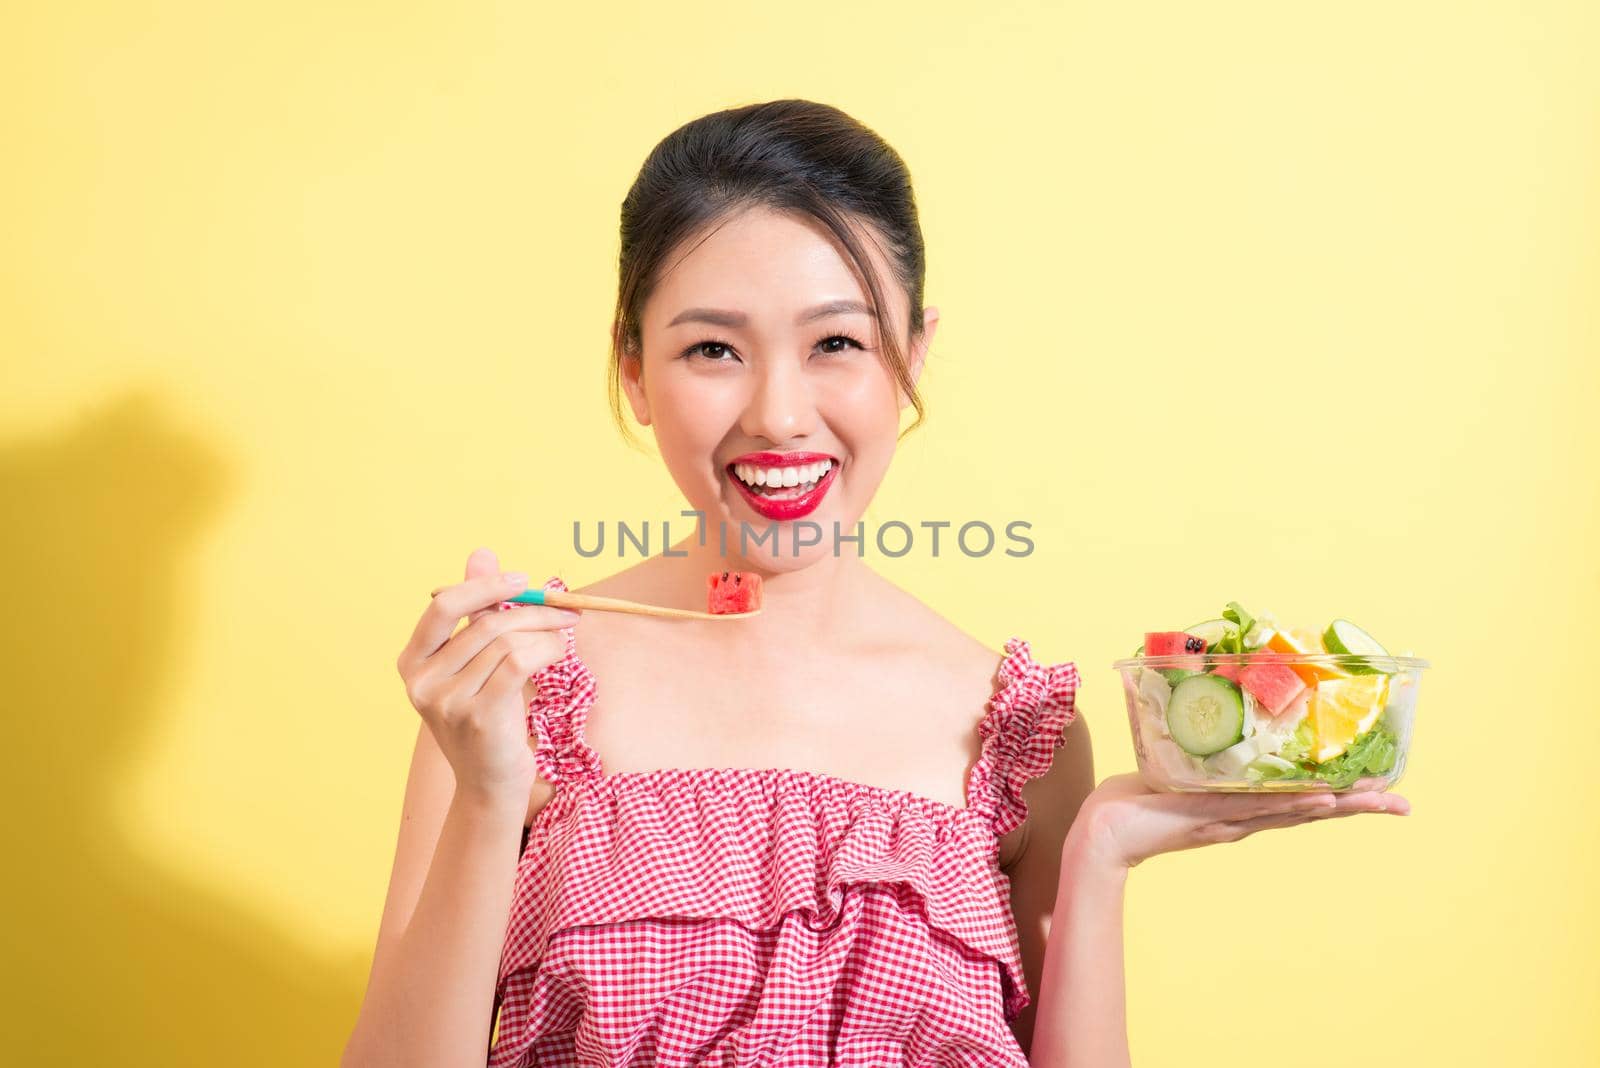 Fashion portrait of young fashionable woman in summer outfit posing with bowl of salad